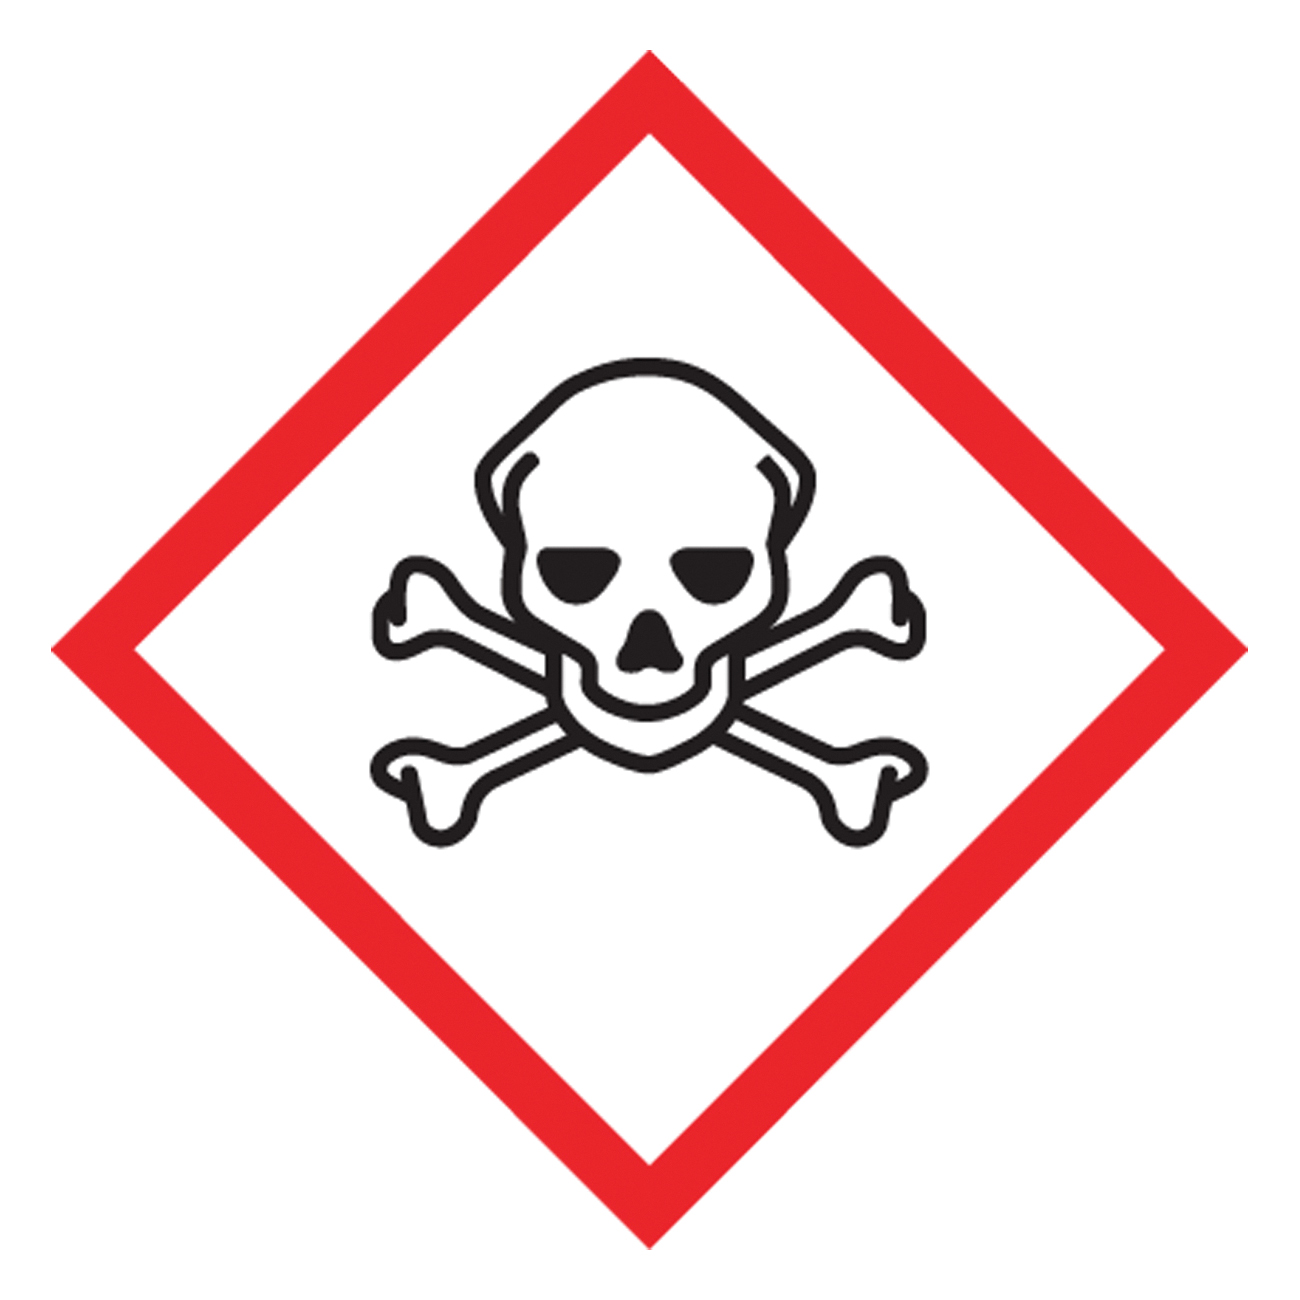 Accuform® LZH606EV5 Diamond Self-Adhesive GHS Pictogram Label, 1 in L x 1 in W, (Skull & Crossbones) Legend, Black/Red/White, Adhesive Polyester, 500 per Roll Labels